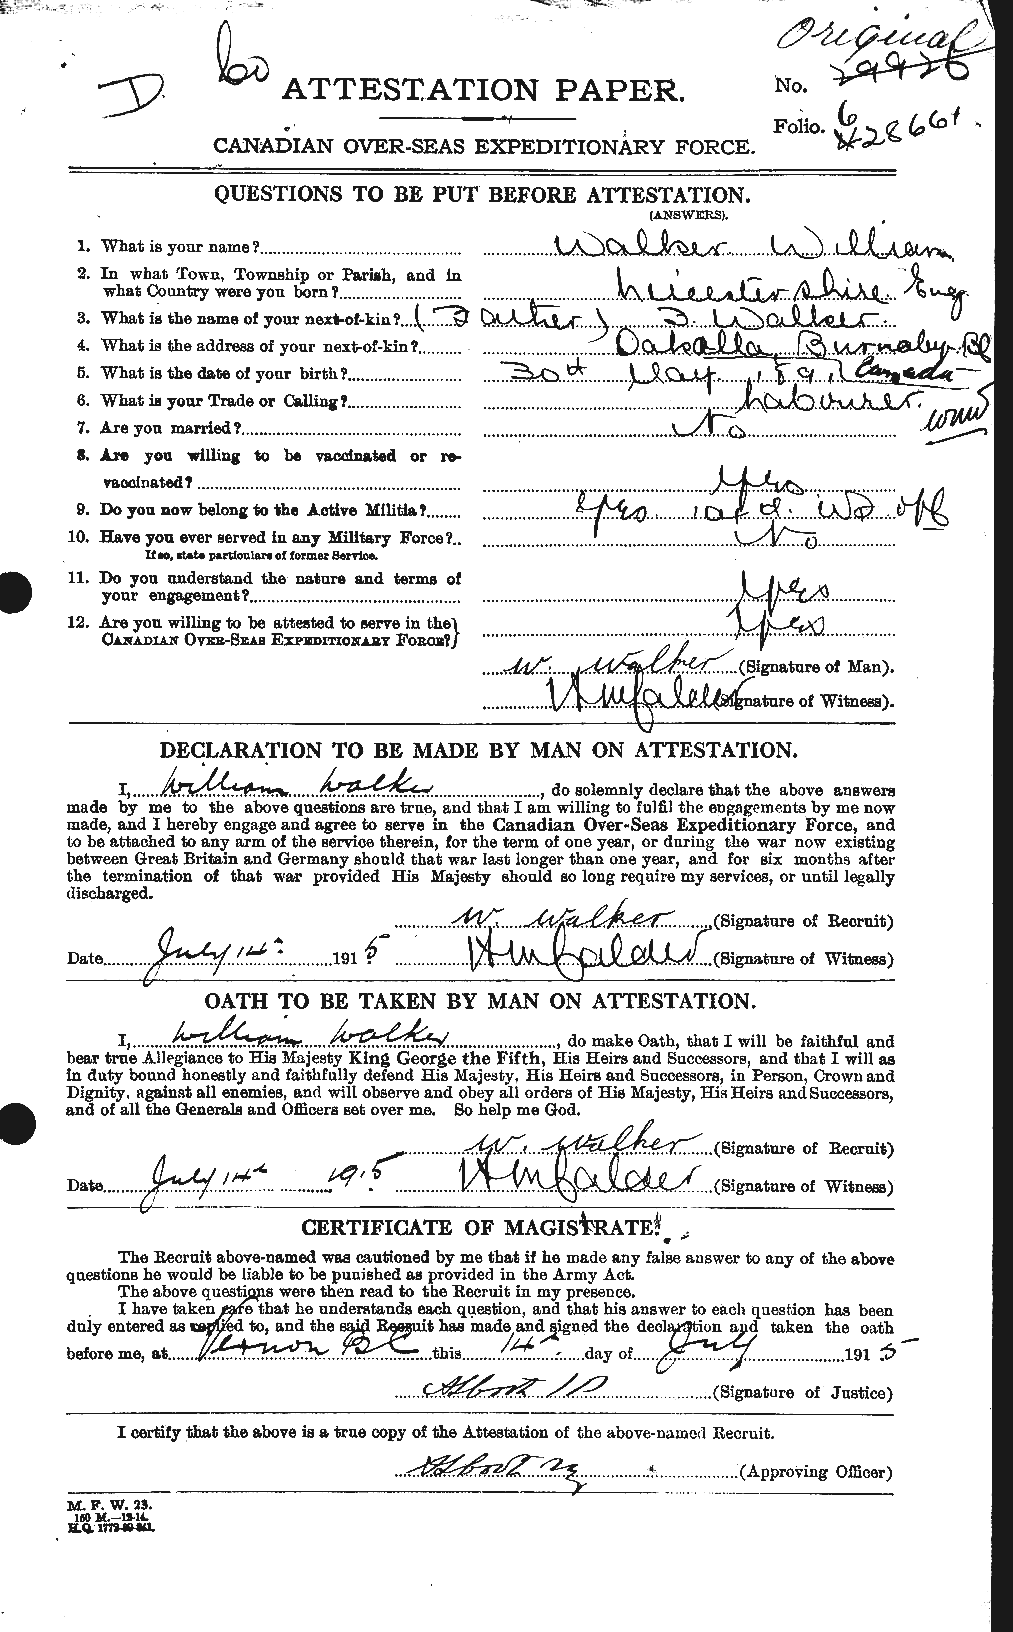 Personnel Records of the First World War - CEF 655883a